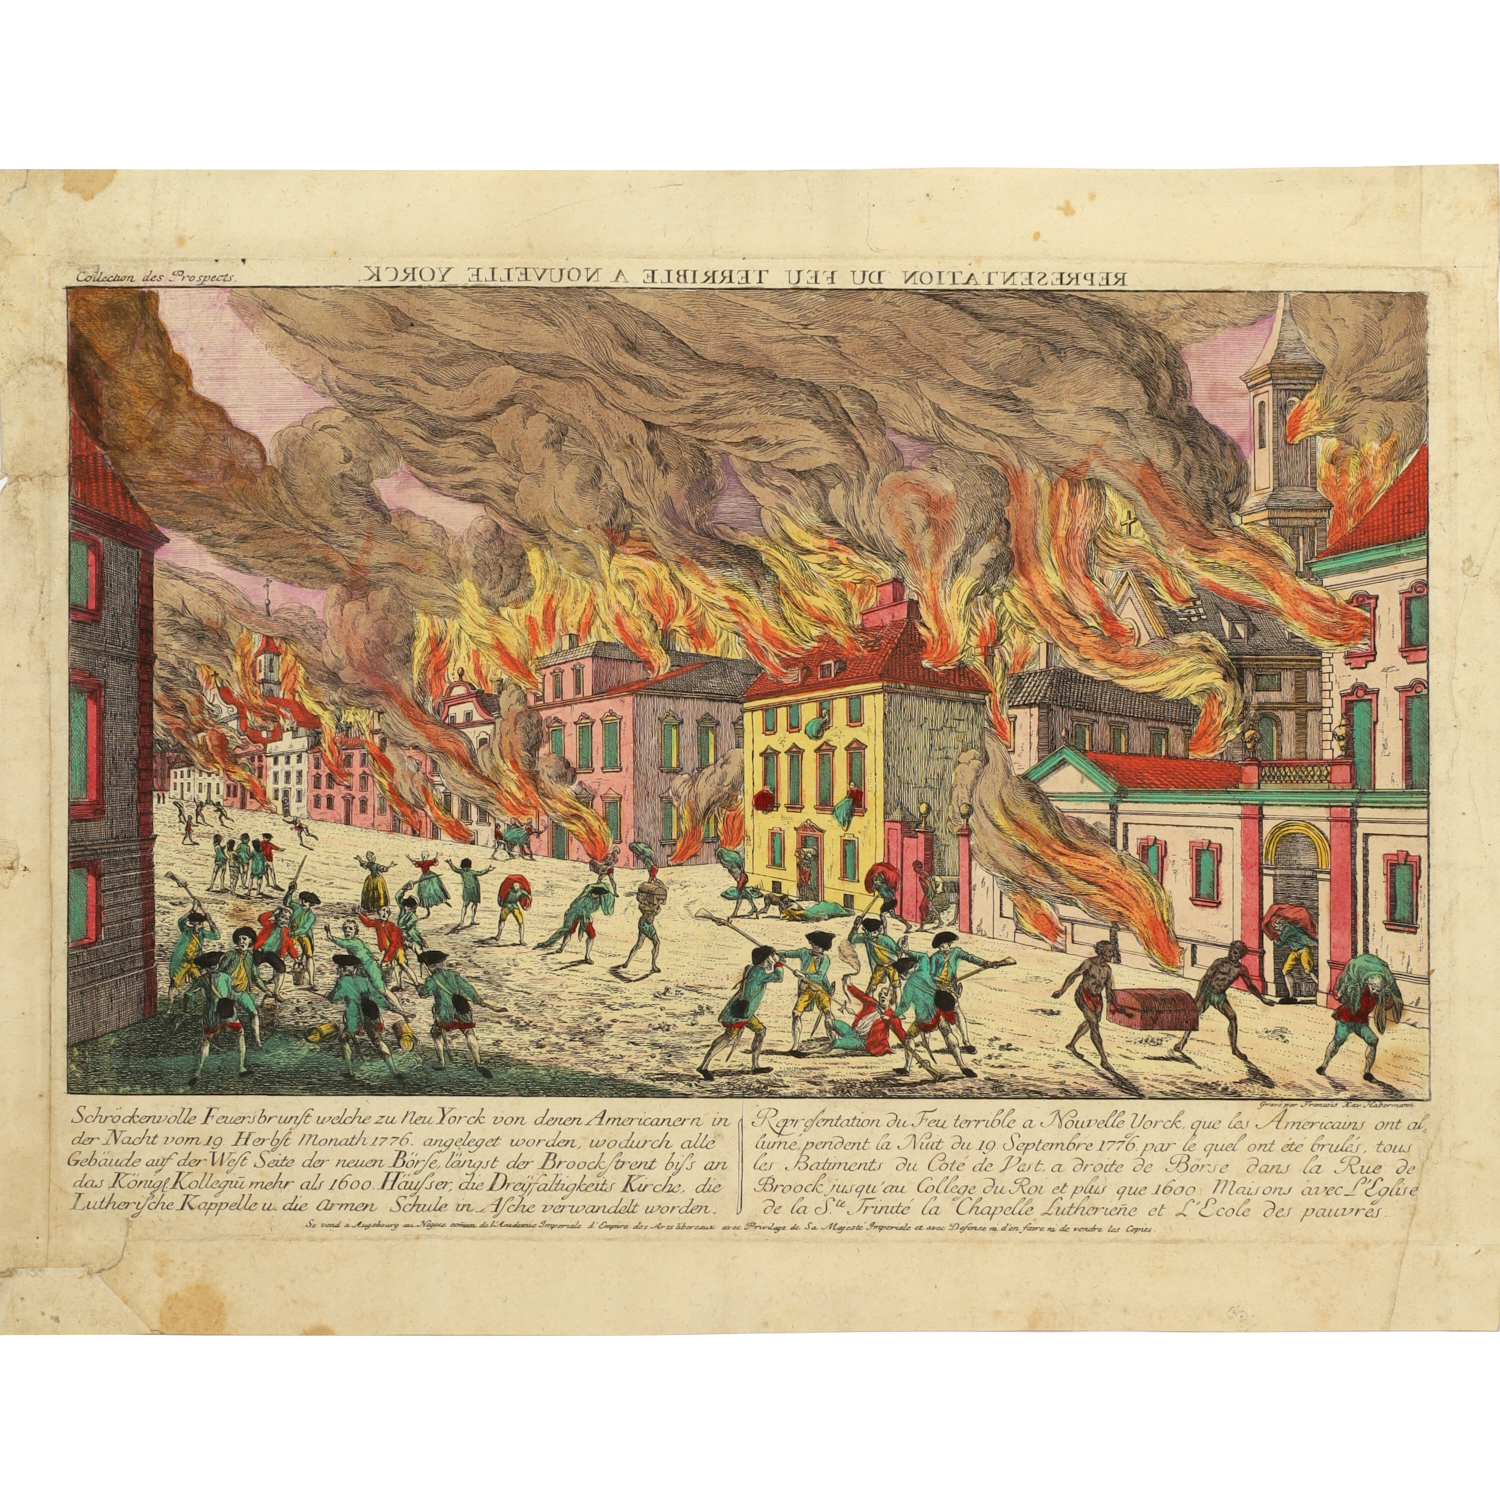 HABERMAN 1776 GREAT FIRE OF NEW 3619d6